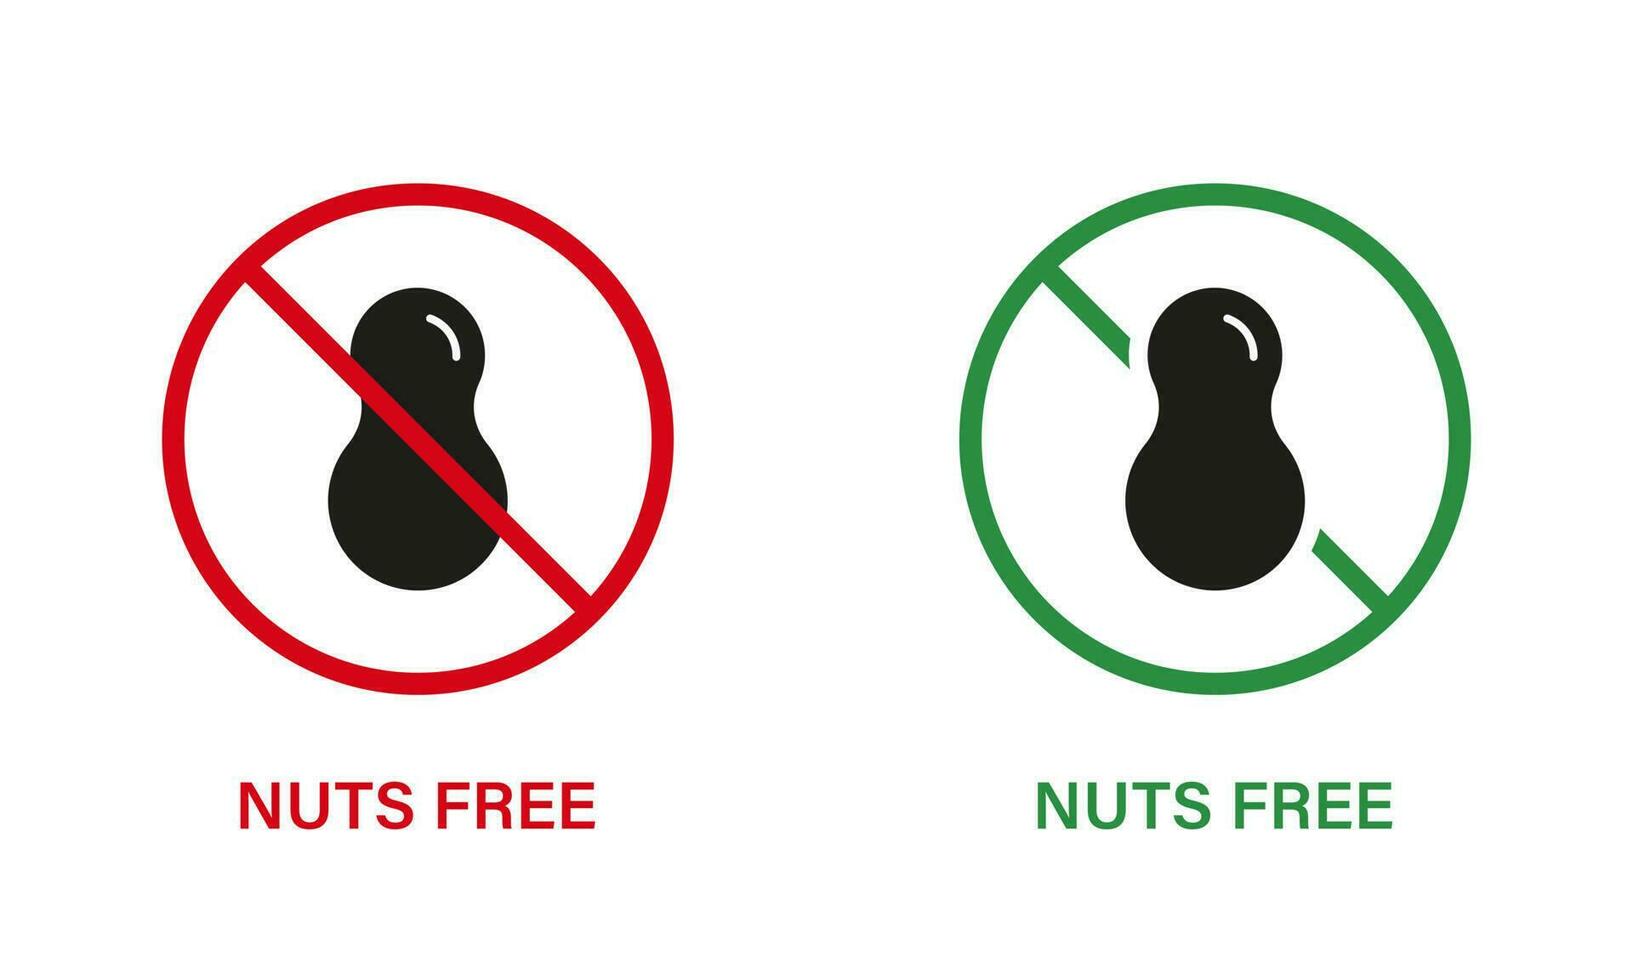 Nut Free Silhouette Icon Set. Nuts Product Stop Sign. Peanuts Forbidden Symbol. Food Allergy on Peanut Logo. No Contain Peanut Label. Avoid Nuts in Food. Isolated Vector Illustration.